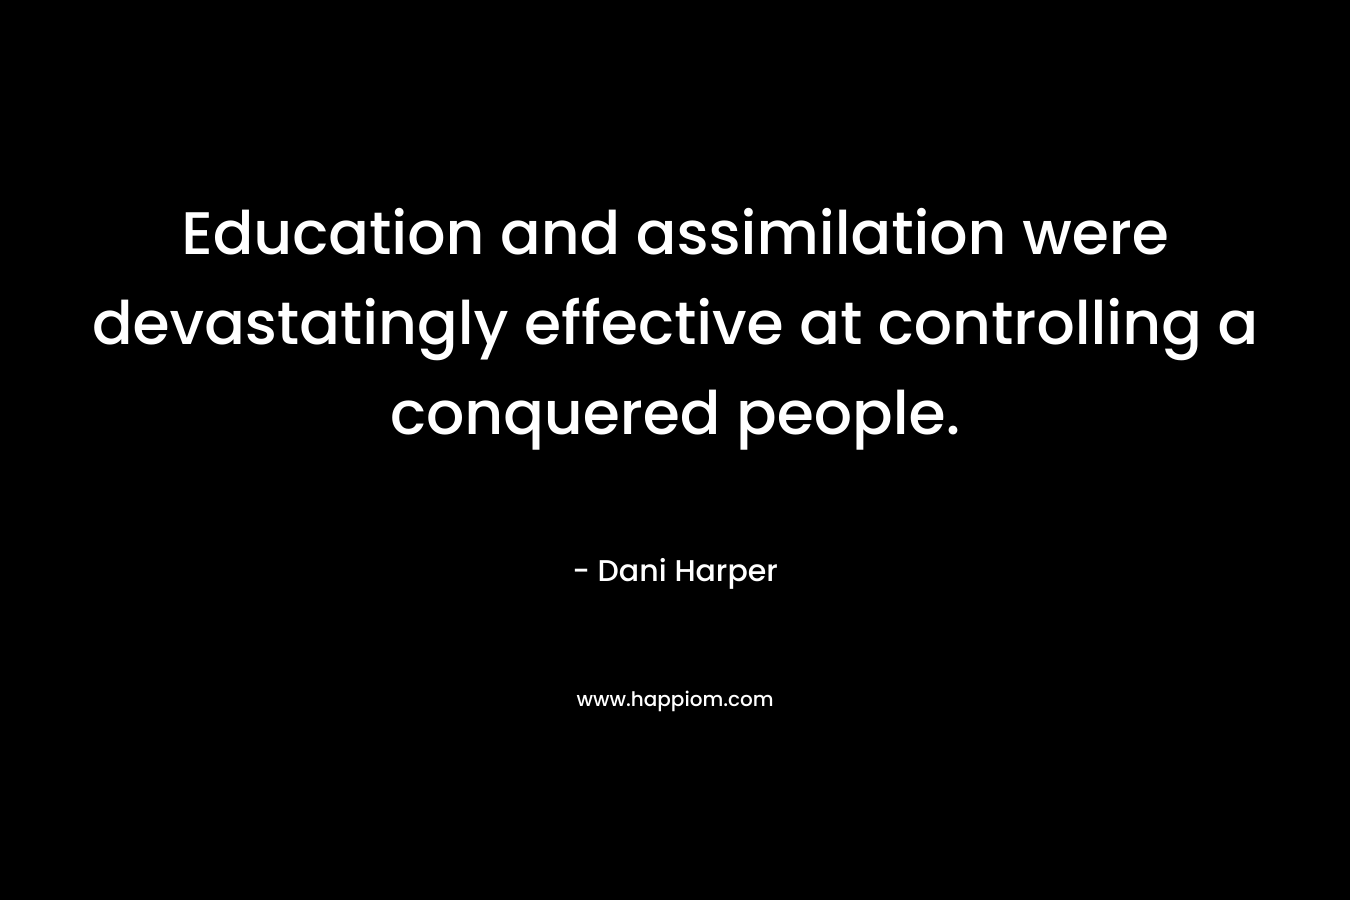 Education and assimilation were devastatingly effective at controlling a conquered people. – Dani Harper